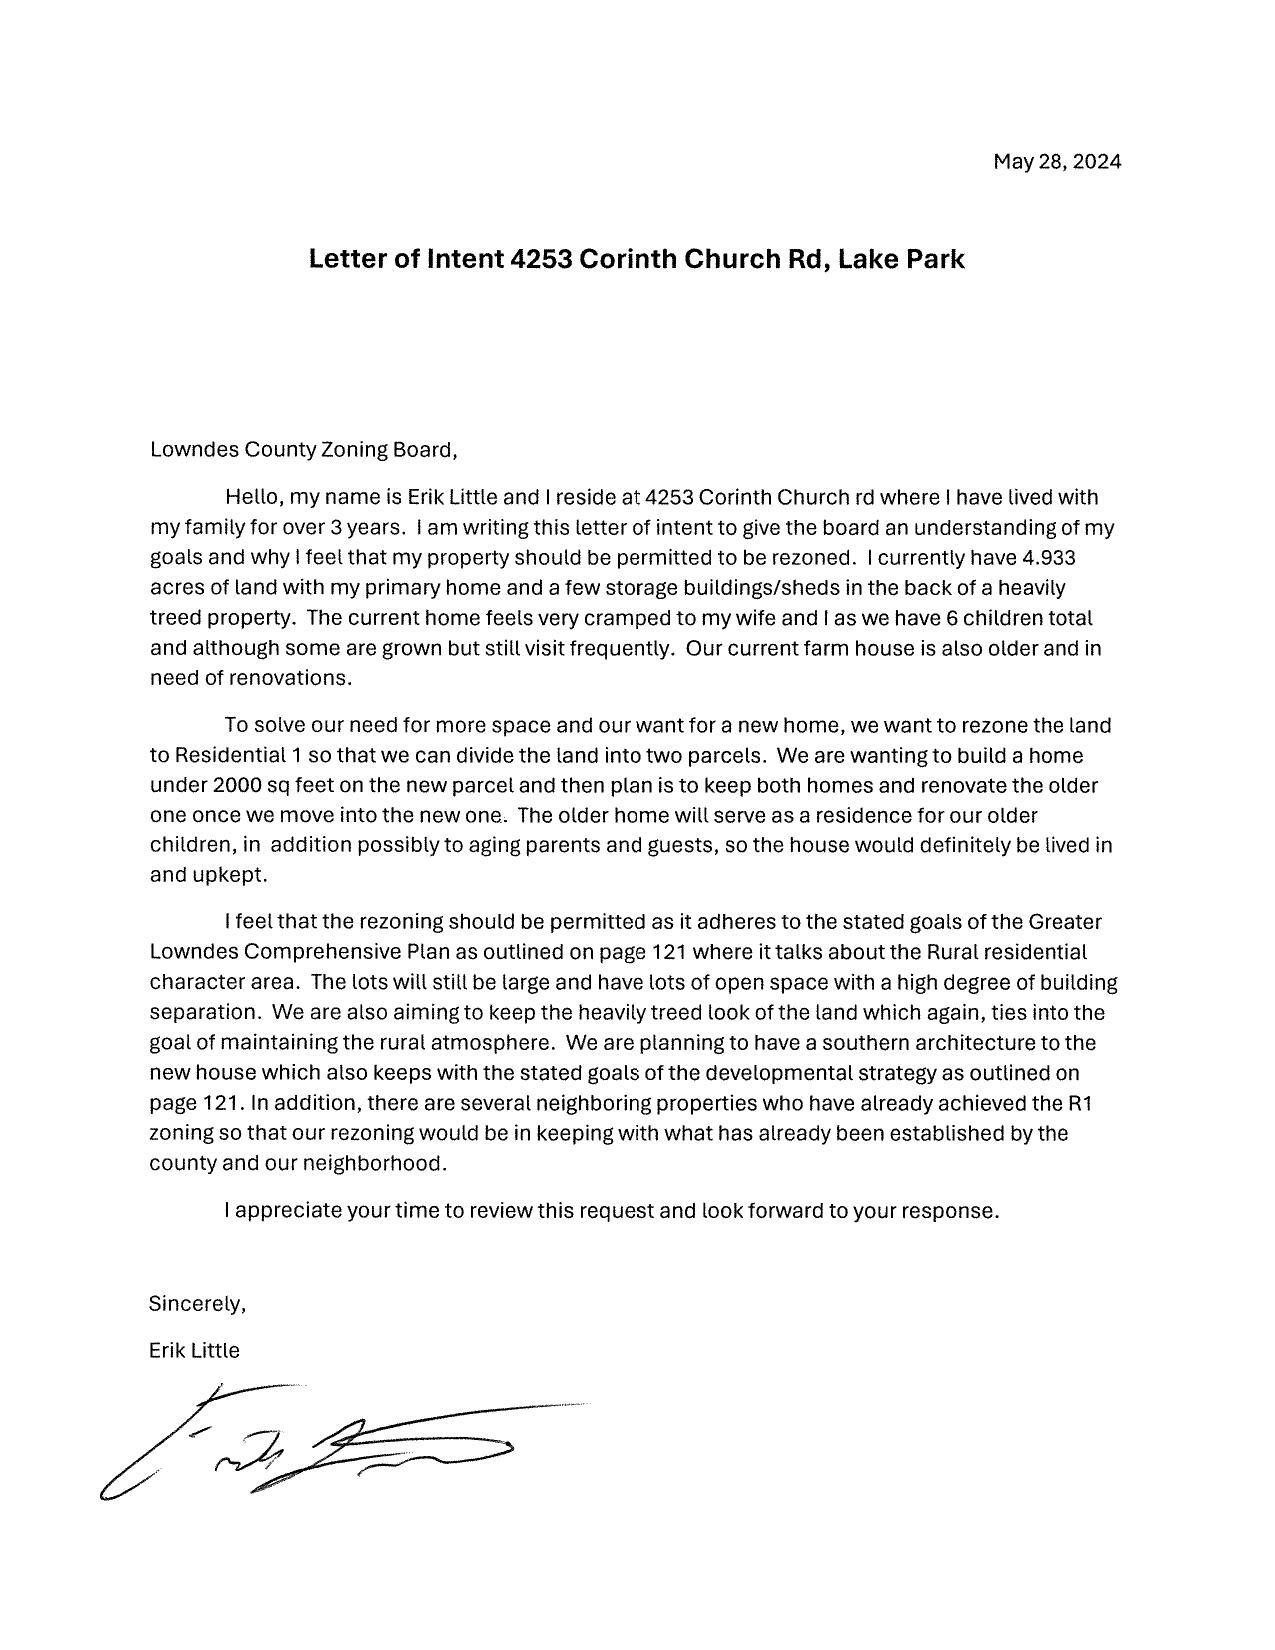 Letter of Intent 4253 Corinth Church Rd, Lake Park